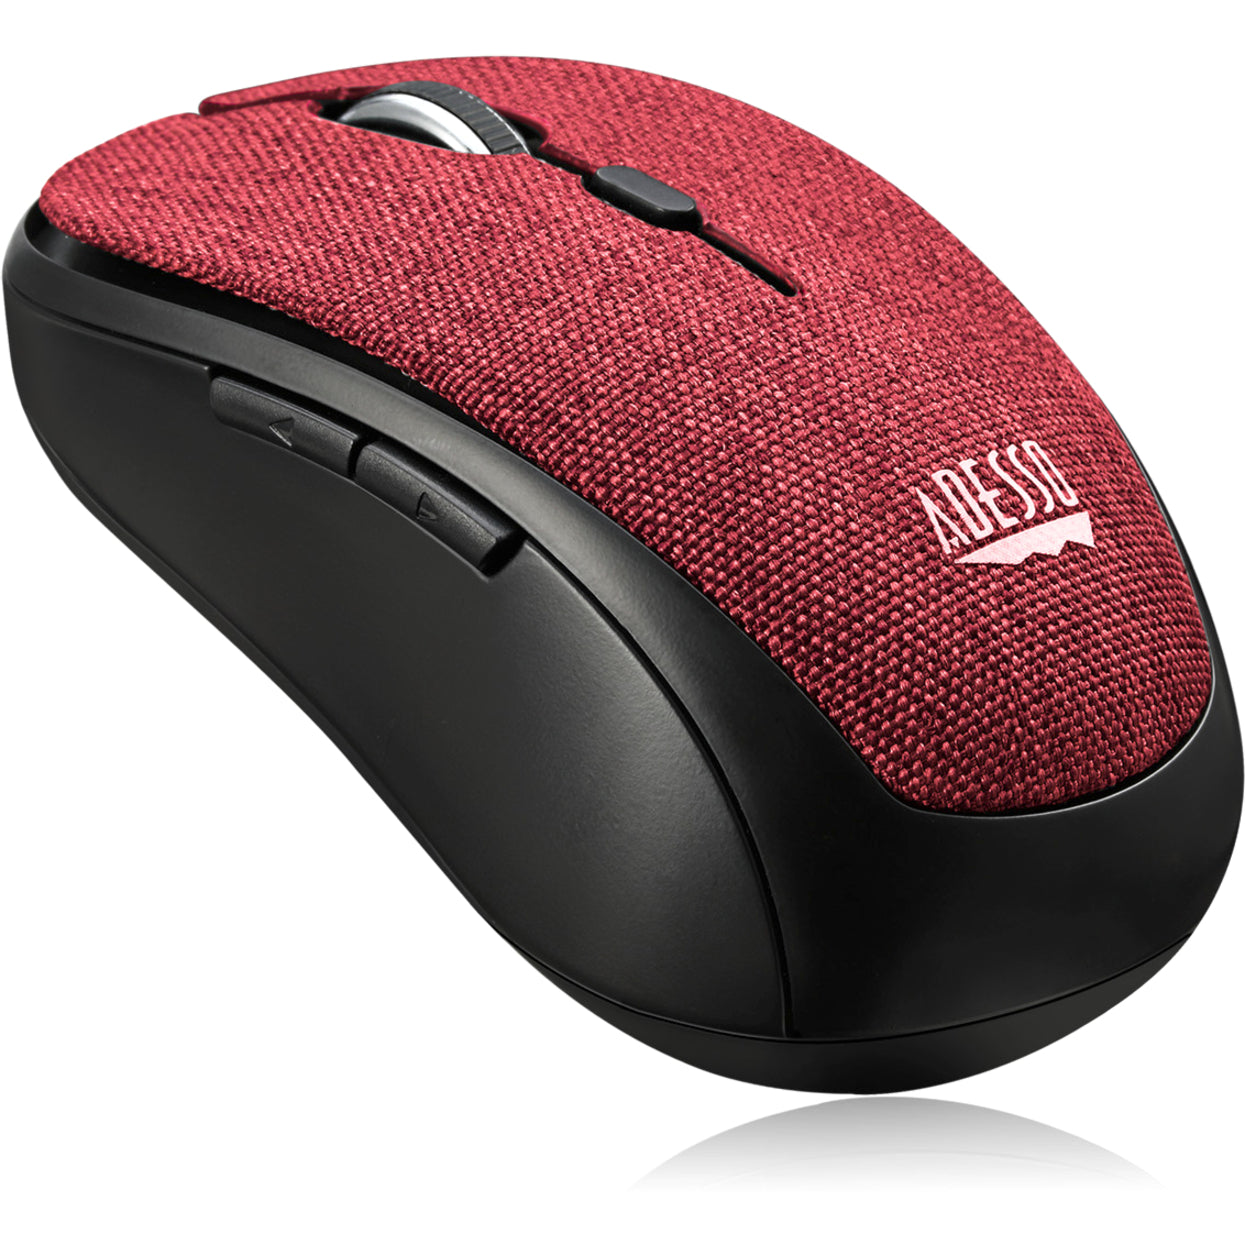 Adesso IMOUSE S80R Wireless Fabric Optical Mini Mouse (Red), Ergonomic Fit, 1600 DPI, 2.4 GHz Wireless Technology